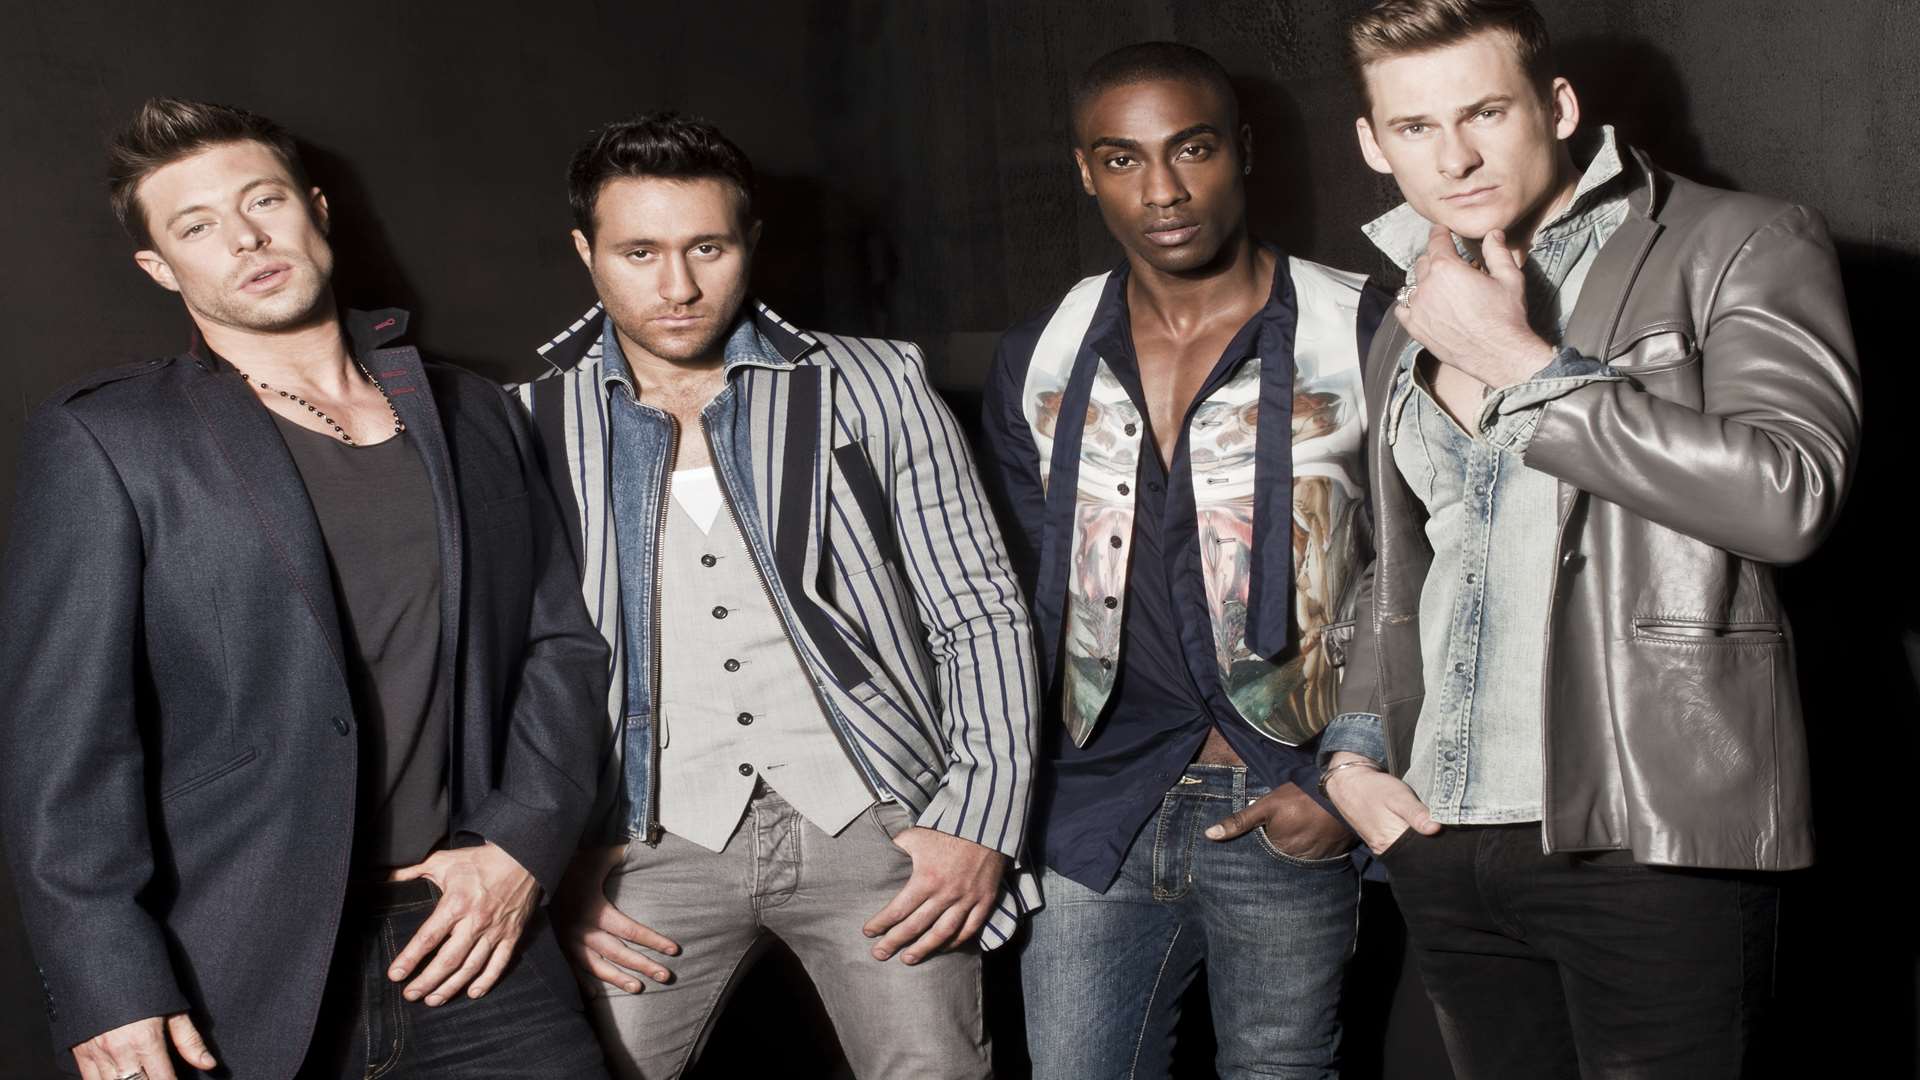 From left to right: Duncan James, Antony Costa, Simon Webbe and Lee Ryan